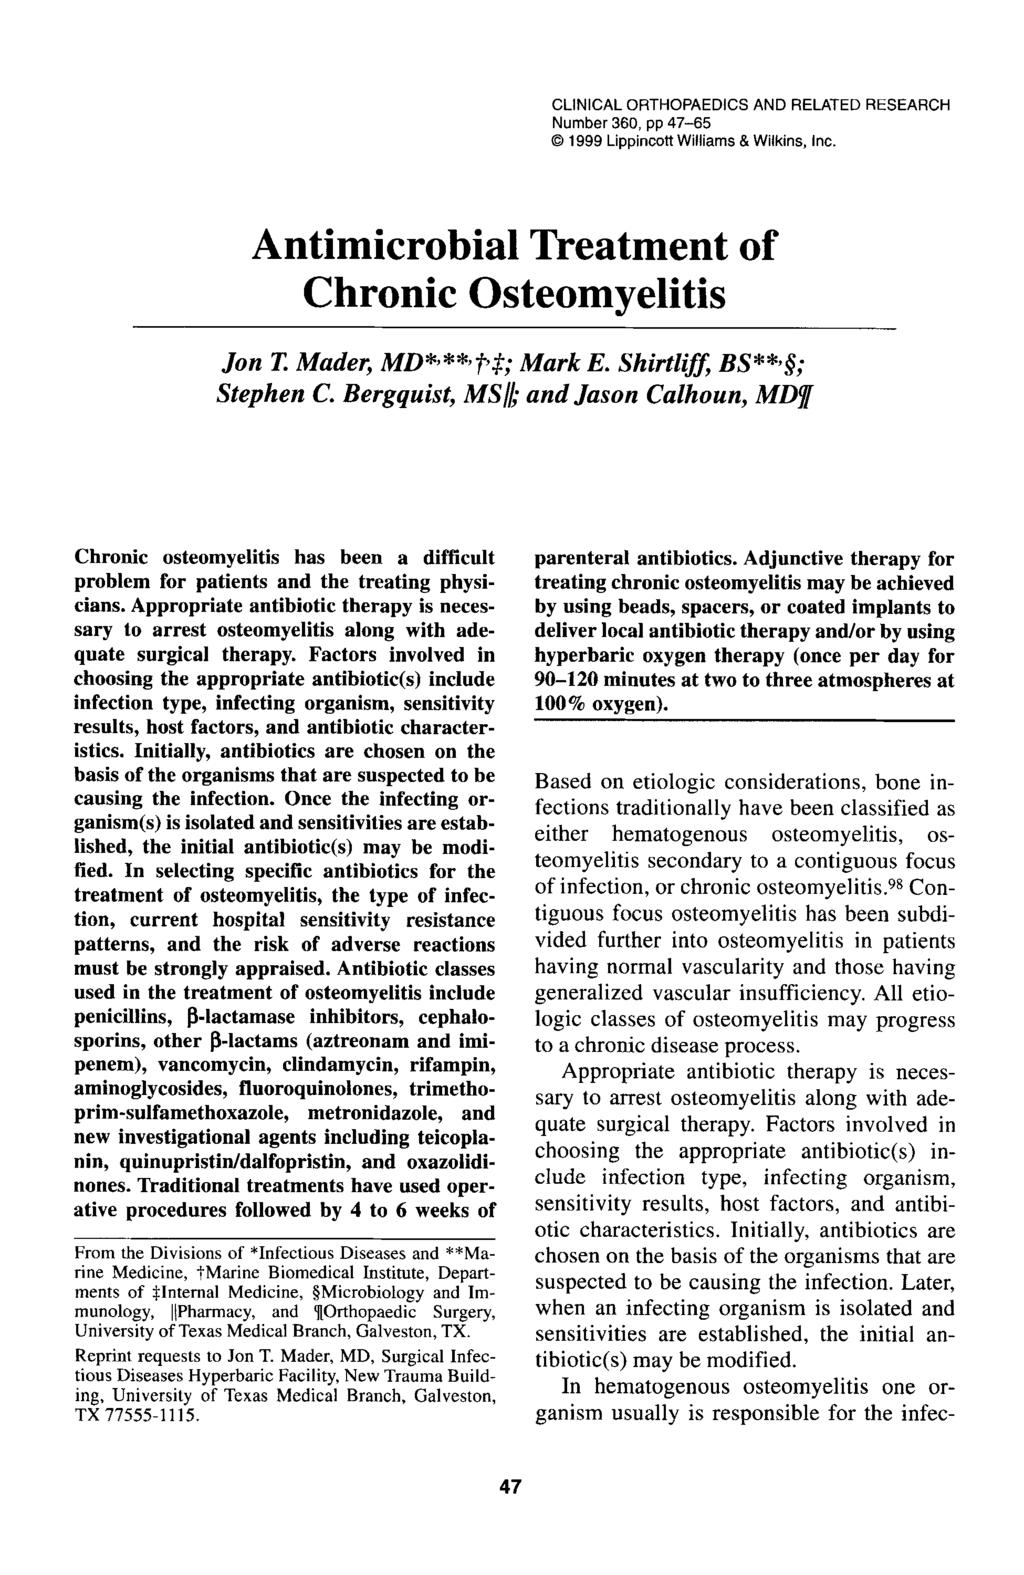 CLINICAL ORTHOPAEDICS AND RELATED RESEARCH Number 360, pp 47-65 0 1999 Lippincott Williams & Wilkins, Inc. Antimicrobial Treatment of Chronic Osteomyelitis Jon T. Mader, MD*j**>P$; Mark E.